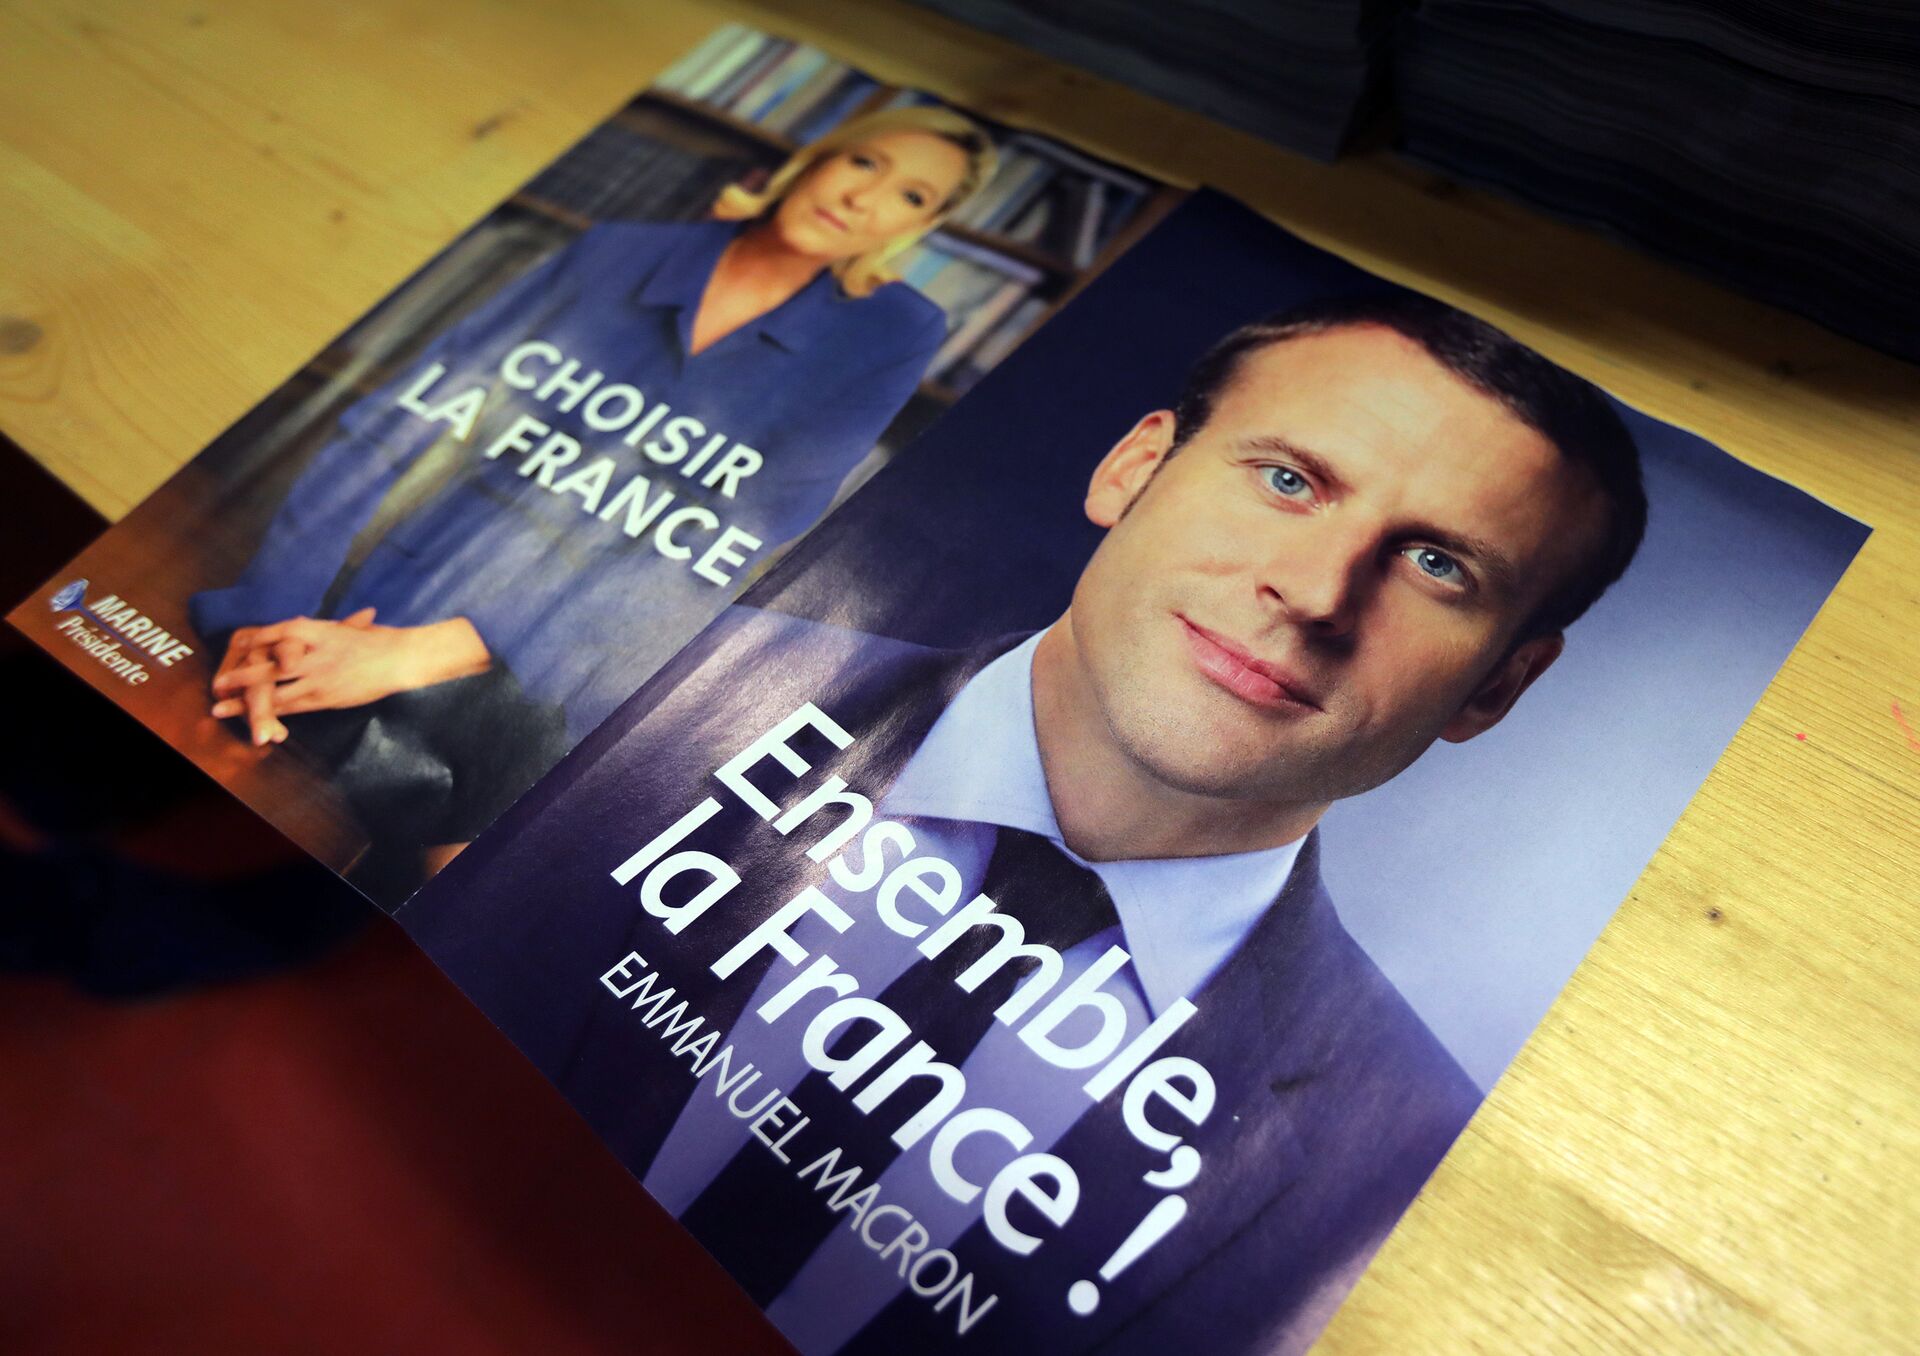 Electoral documents for the upcoming second round of 2017 French presidential election are displayed as registered voters will receive an envelope containing the declarations of faith of each candidate, Emmanuel Macron (R) and Marine Le Pen (L), along with the two ballot papers for the May 7 second round of the French presidential election, in Nice, France, May 3, 2017 - Sputnik International, 1920, 19.04.2022